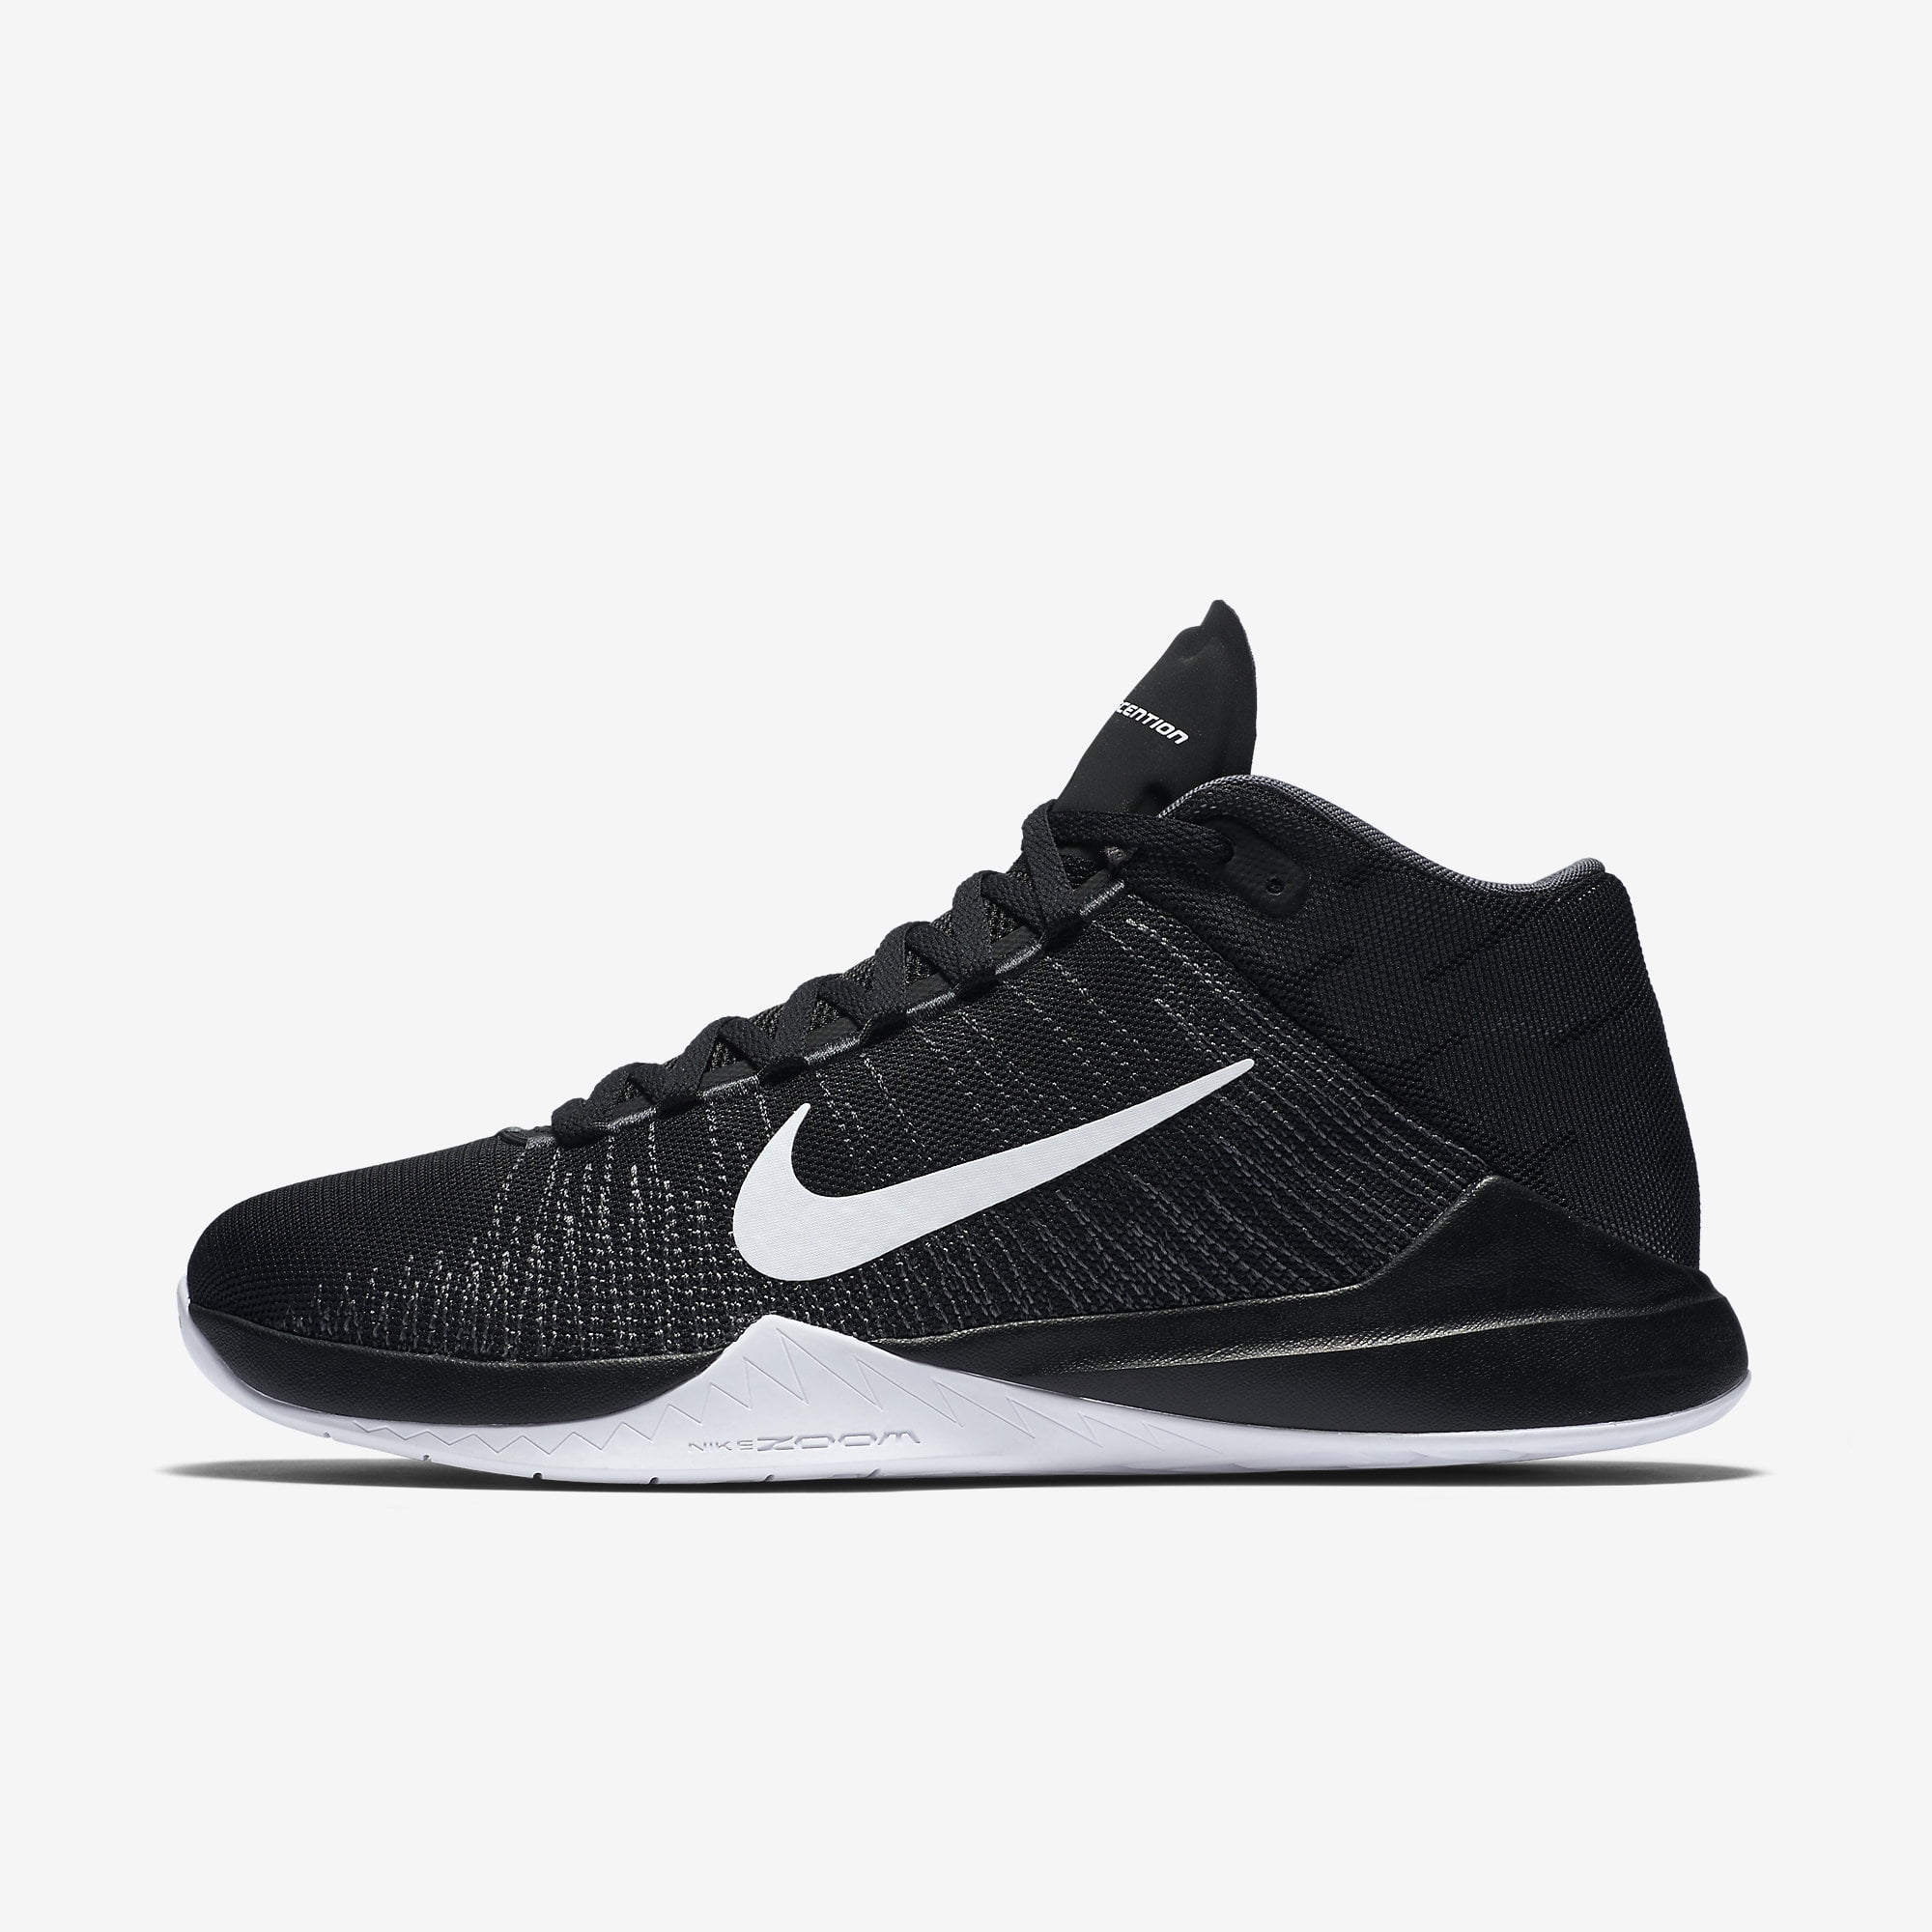 NIKE ASCENTION Mens -